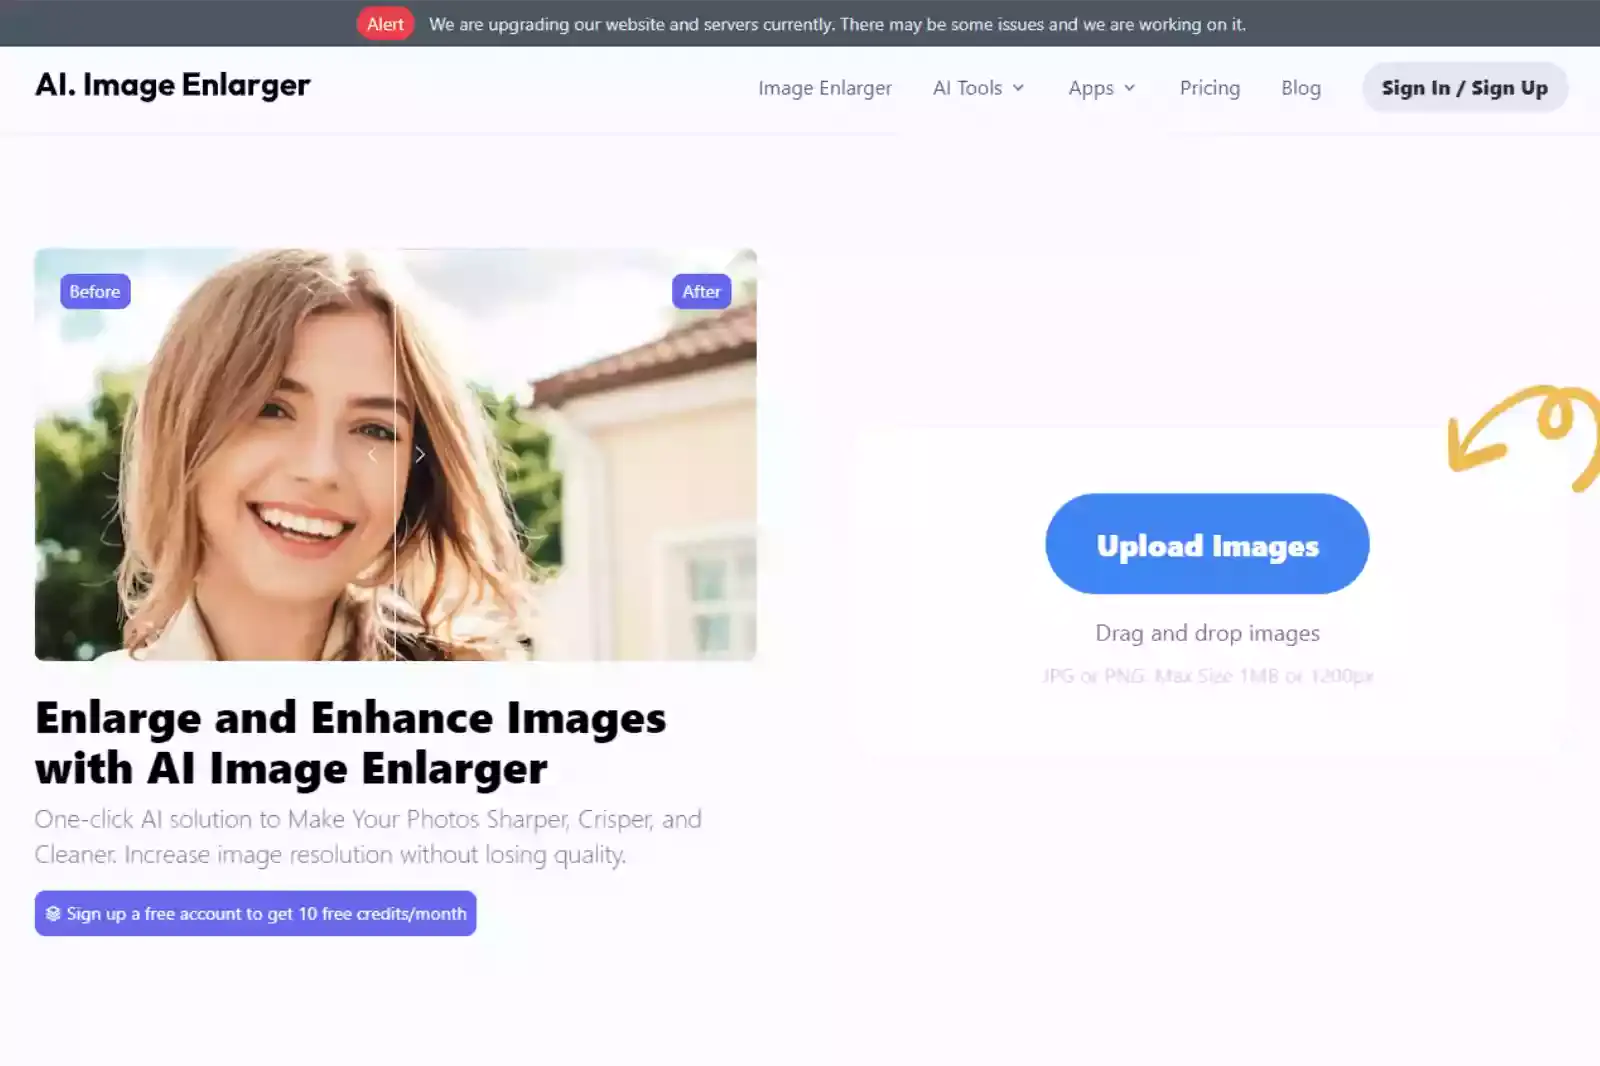 Home Page of AI Image Enlarger